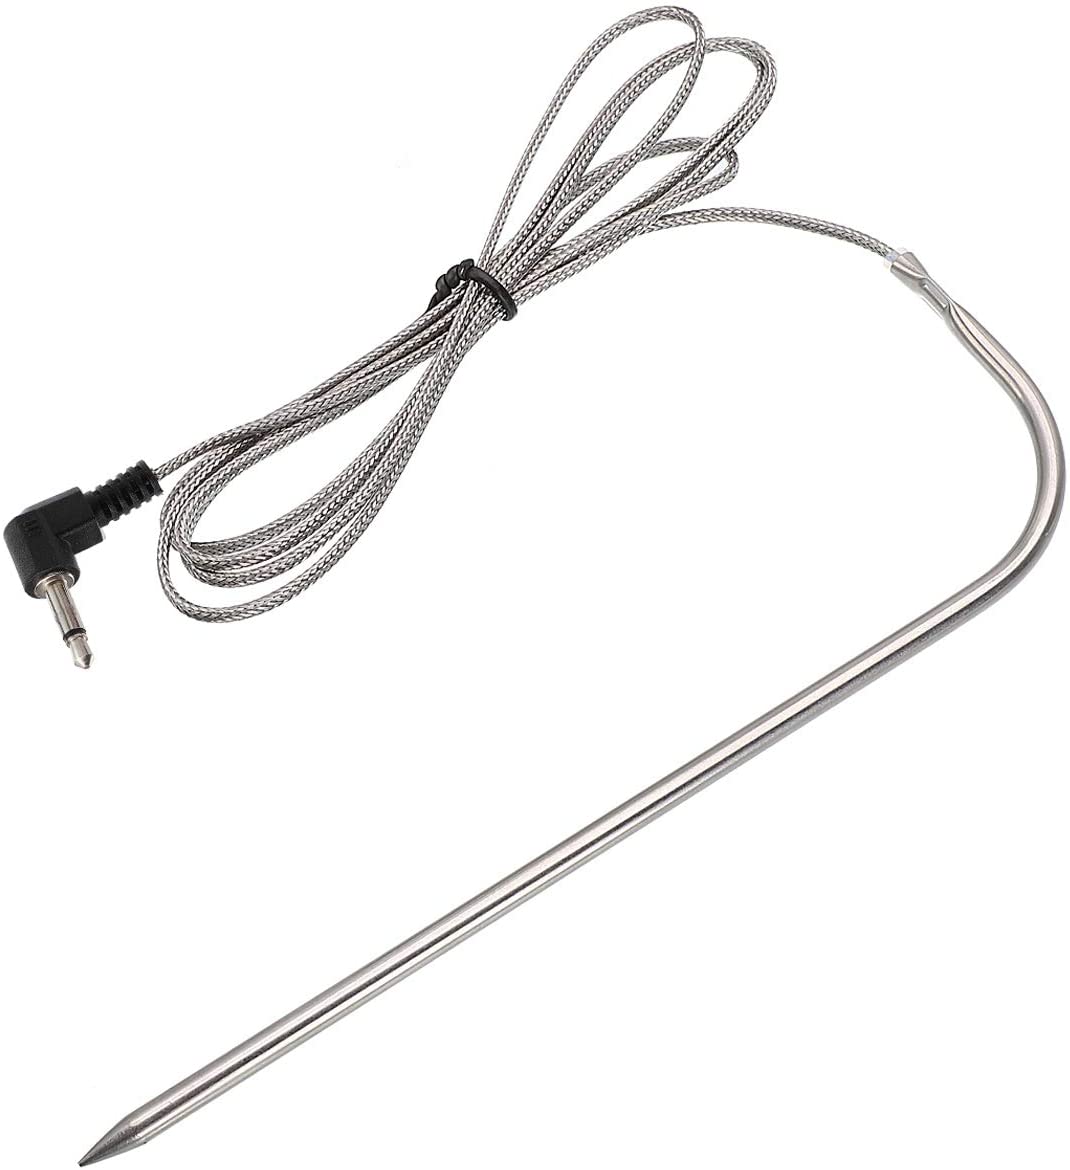 Flame Boss High Temperature Meat Probe